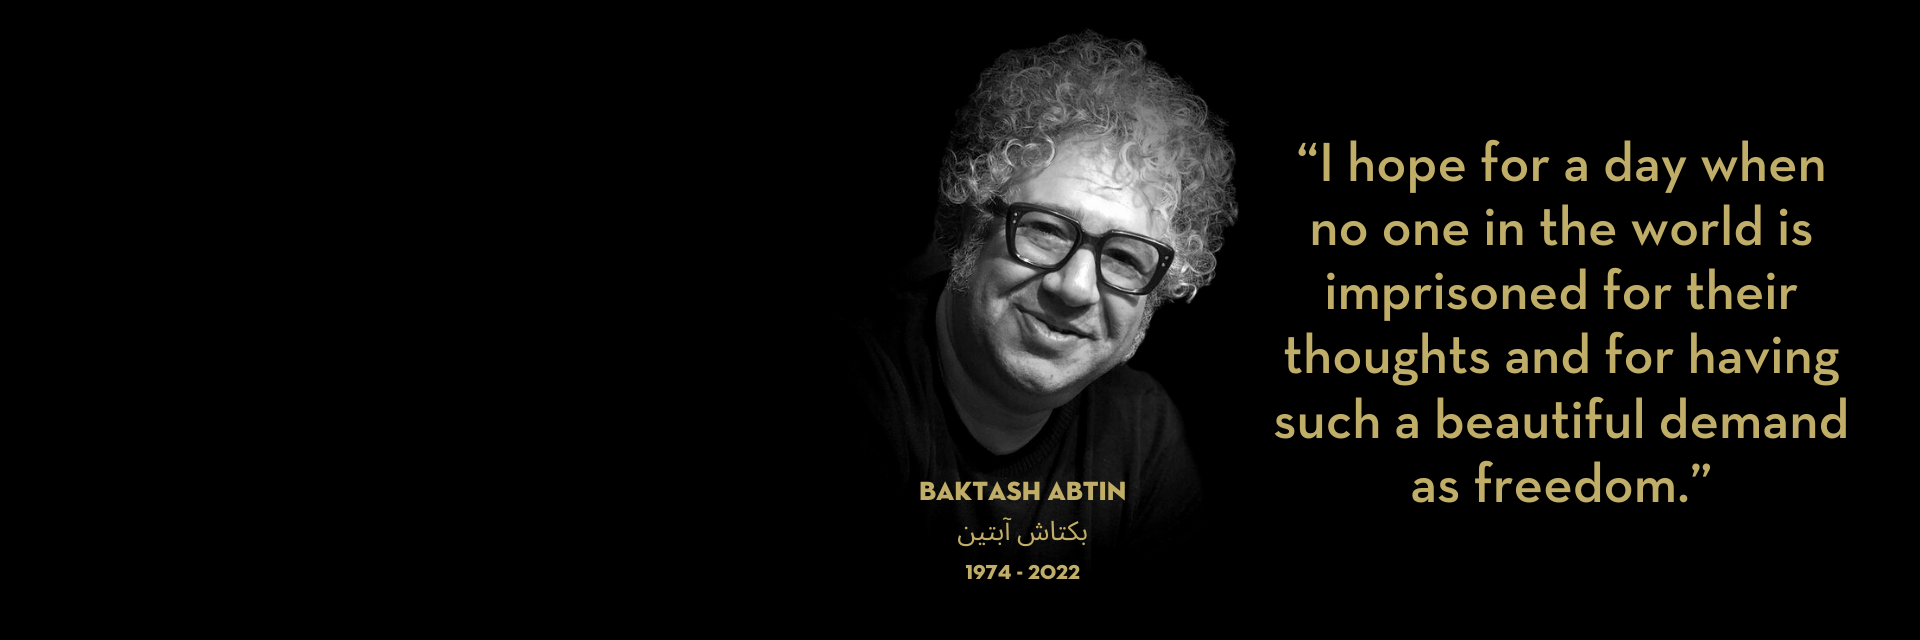 Baktash Abtin headshot with lifespan (1974-2022) on left; on right: Abtin’s quote: “I hope for a day when no one in the world is imprisoned for their thoughts and for having such a beautiful demand as freedom.”